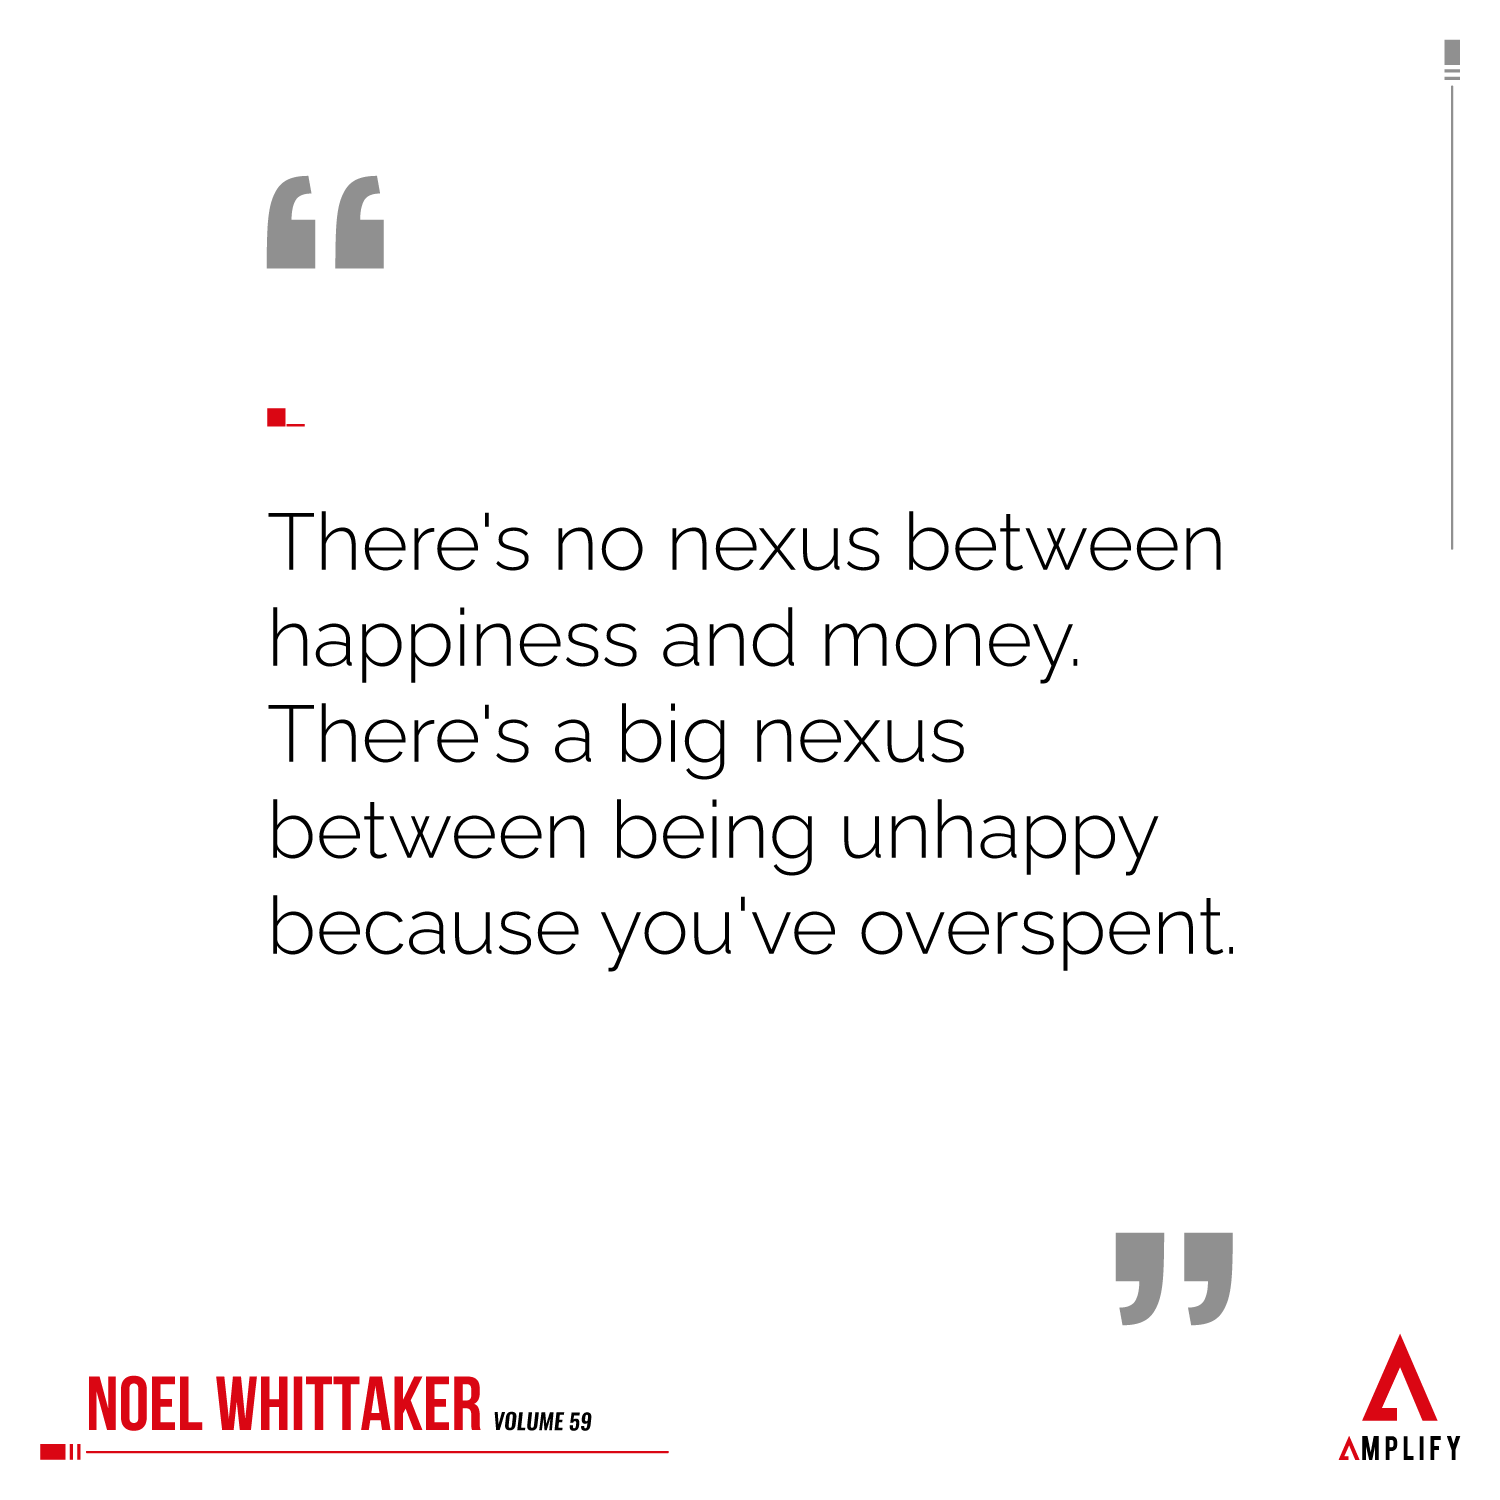 Quote: There's no nexus between happiness and money. There's a big nexus between being unhappy because you've overspent.